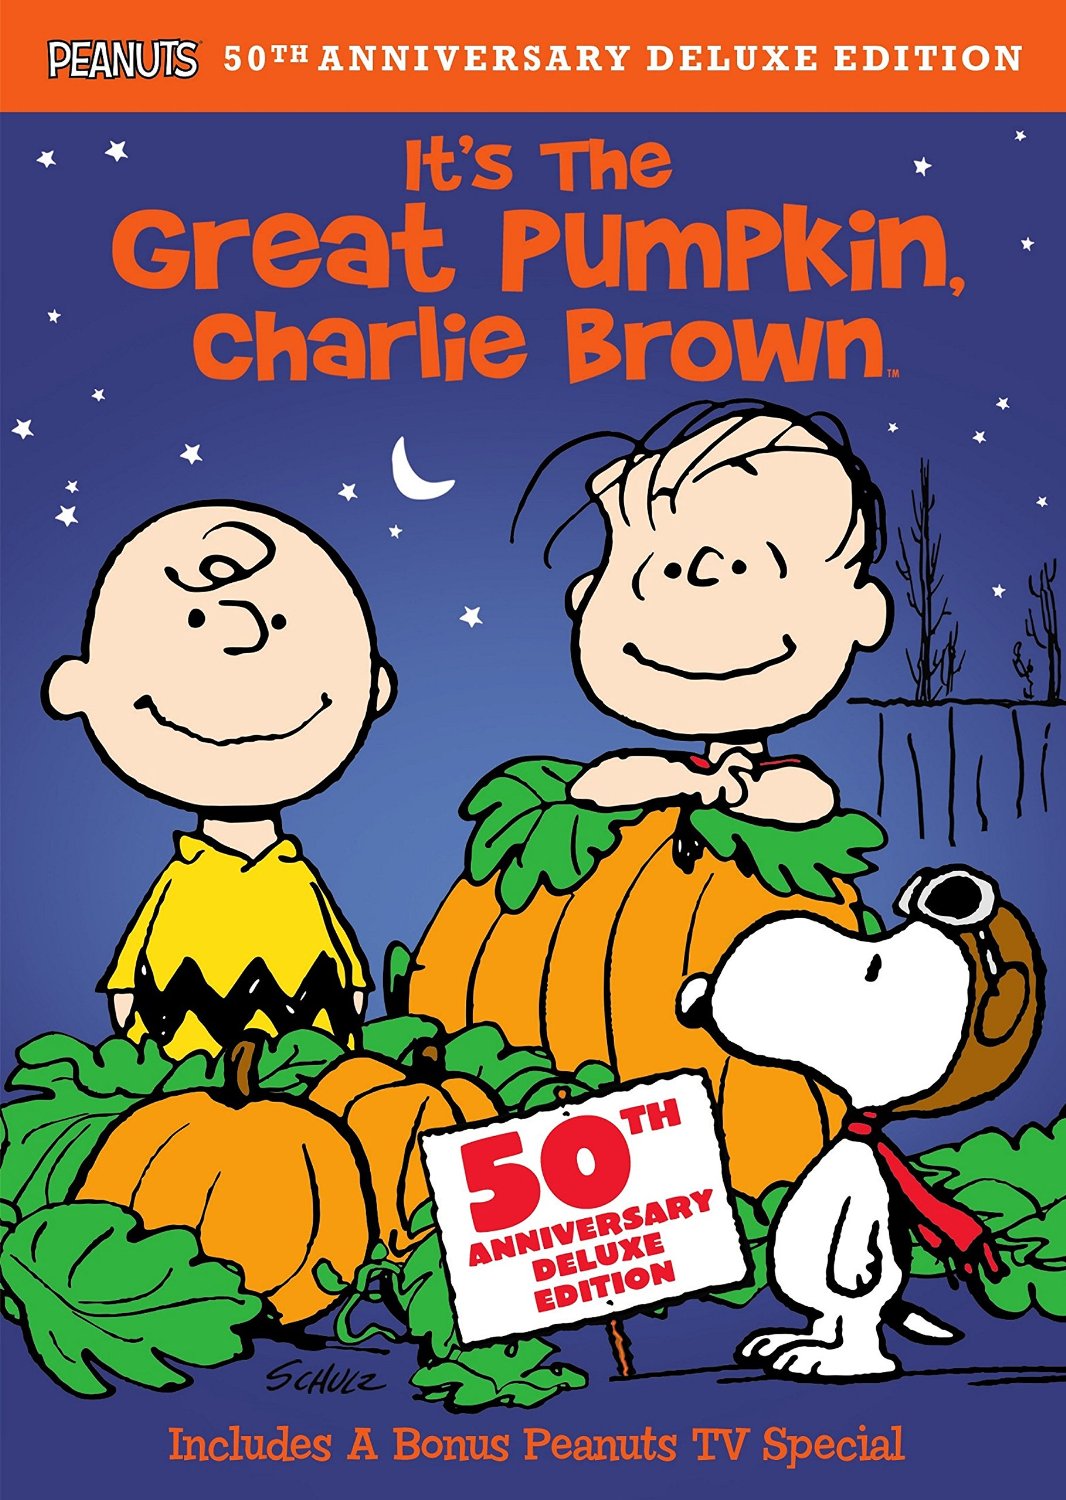 It’s the Great Pumpkin, Charlie Brown on DVD – Just $9.96!